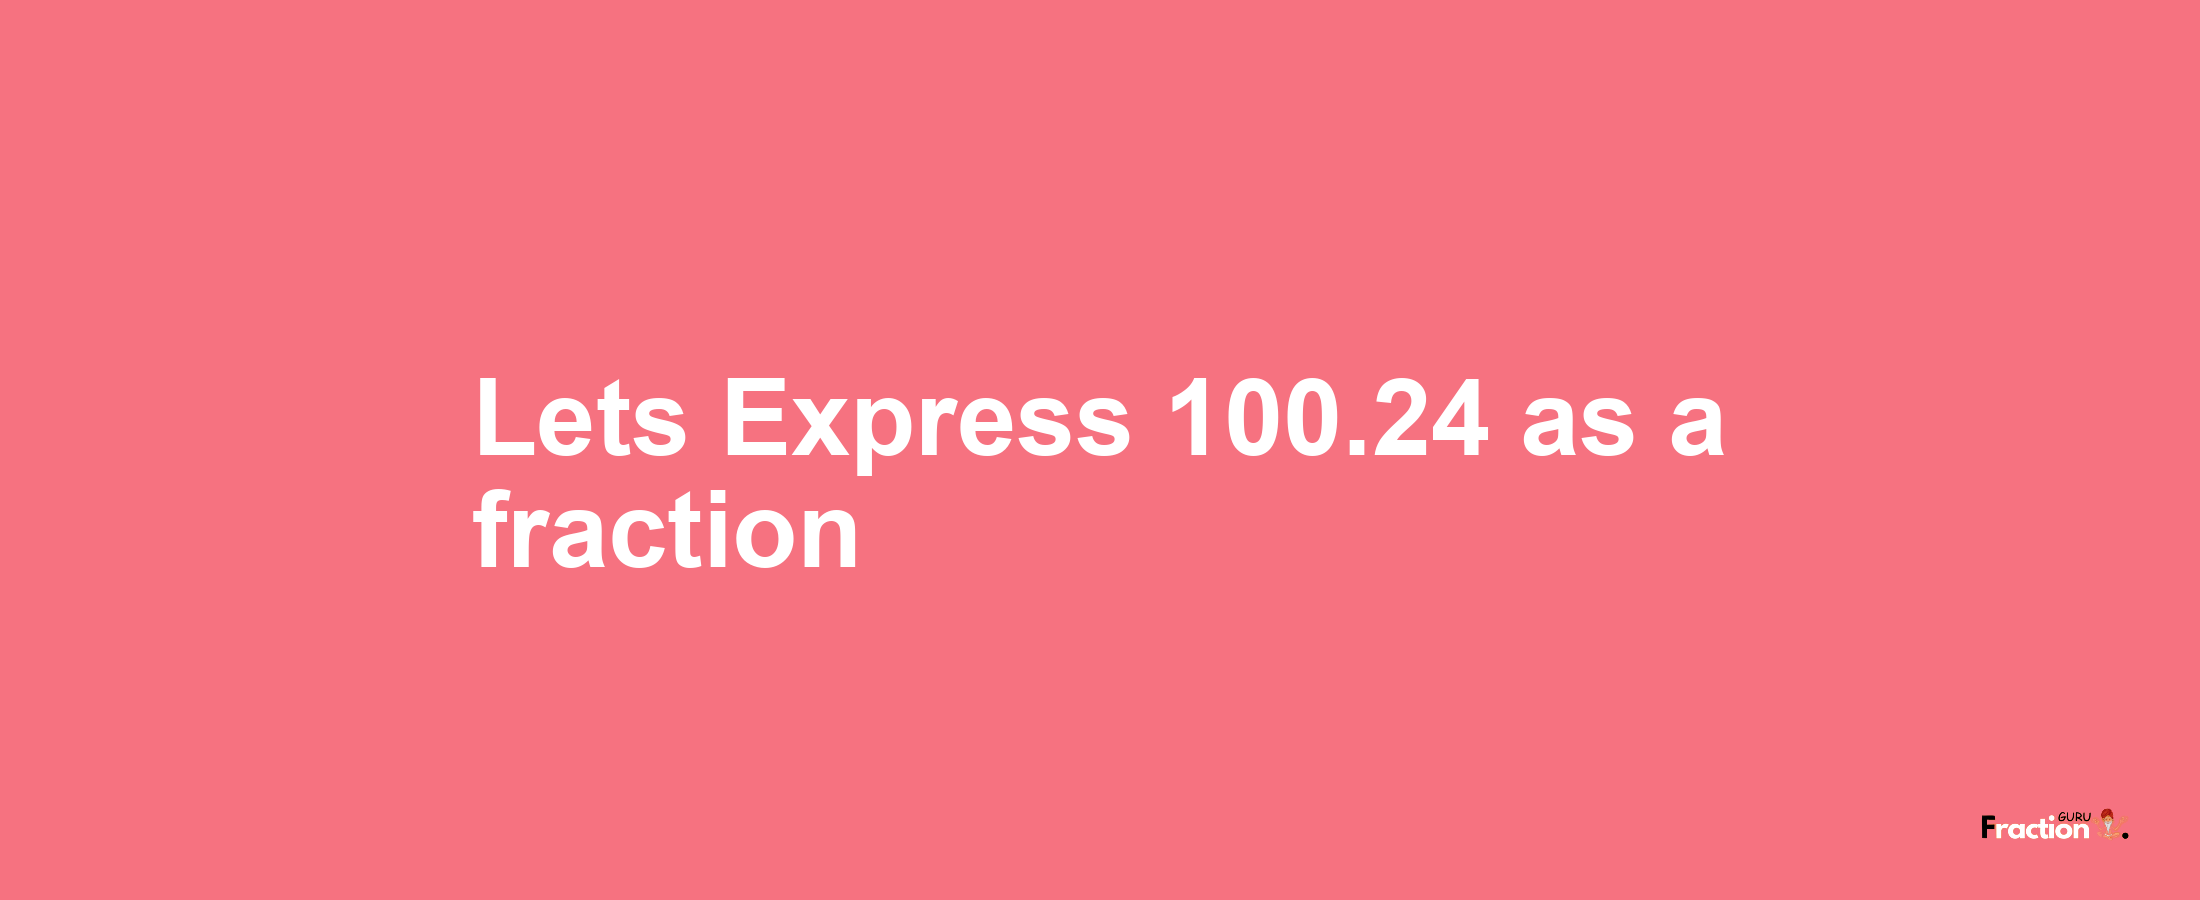 Lets Express 100.24 as afraction